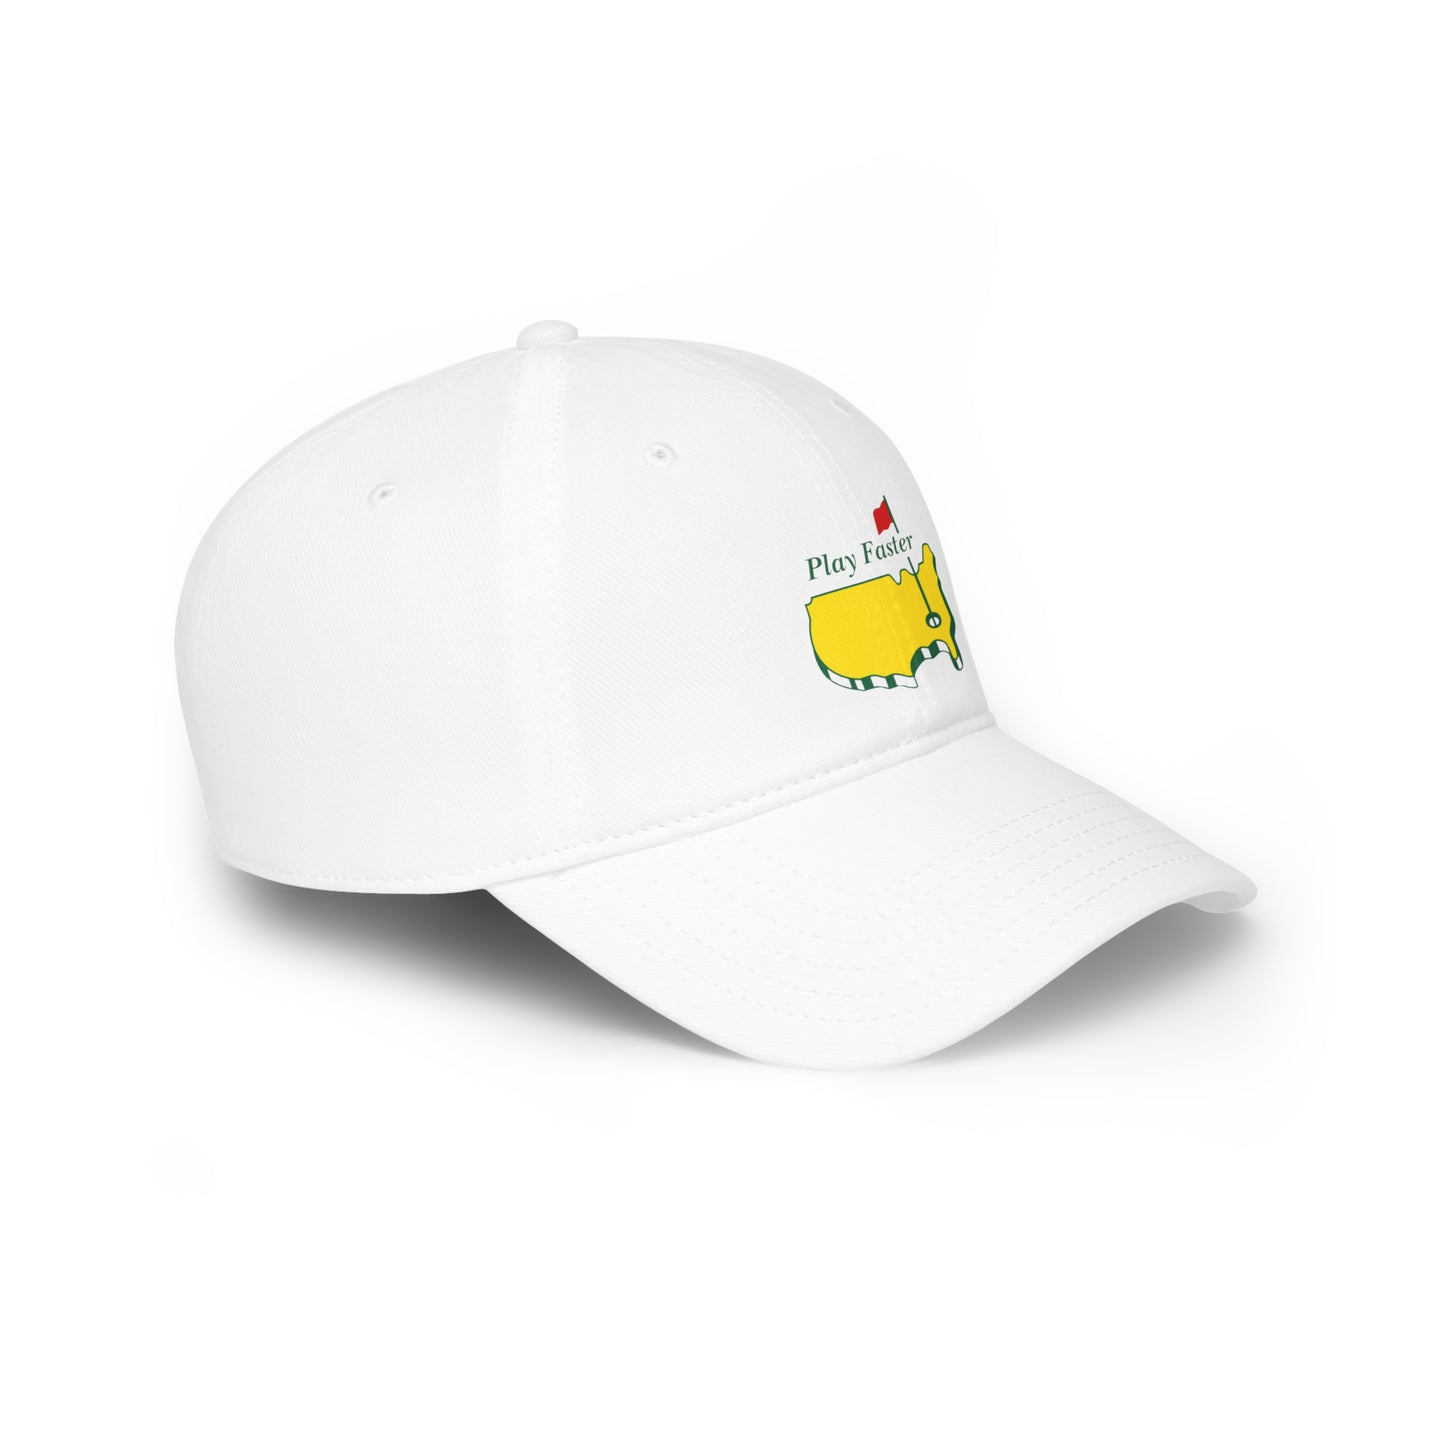 Play Faster Golf Hat